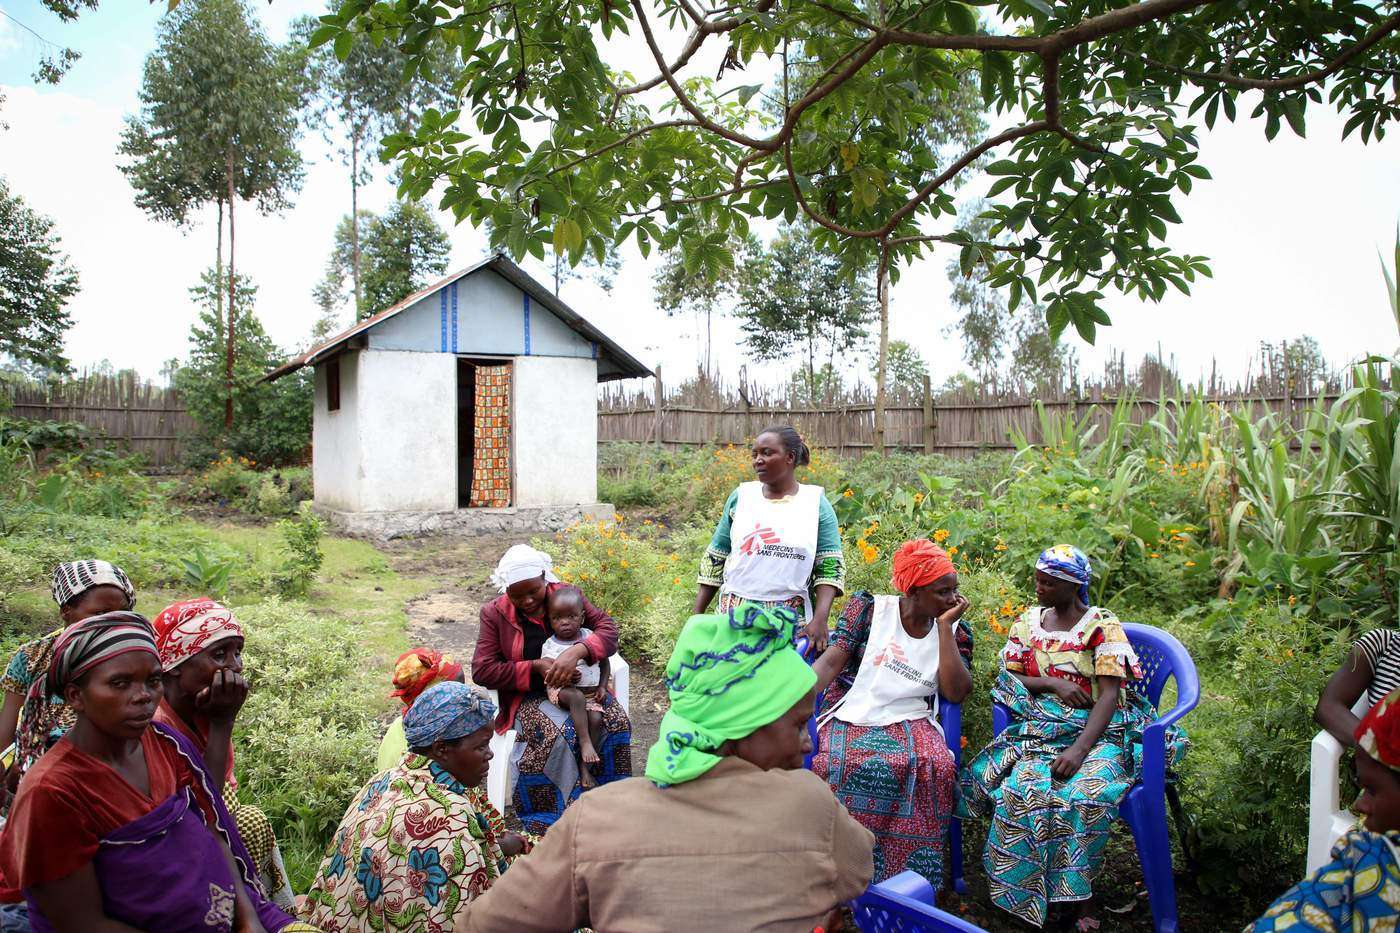 Twice a week in MSF&#39;s Tumaini clinic  [which means &#39;Hope&#39; in Swahili] in Kitchanga, women take part in a group counselling session to discuss their experiences with sexual and domestic violence, or other problems that affect their daily lives. © Sara Creta\/MSF